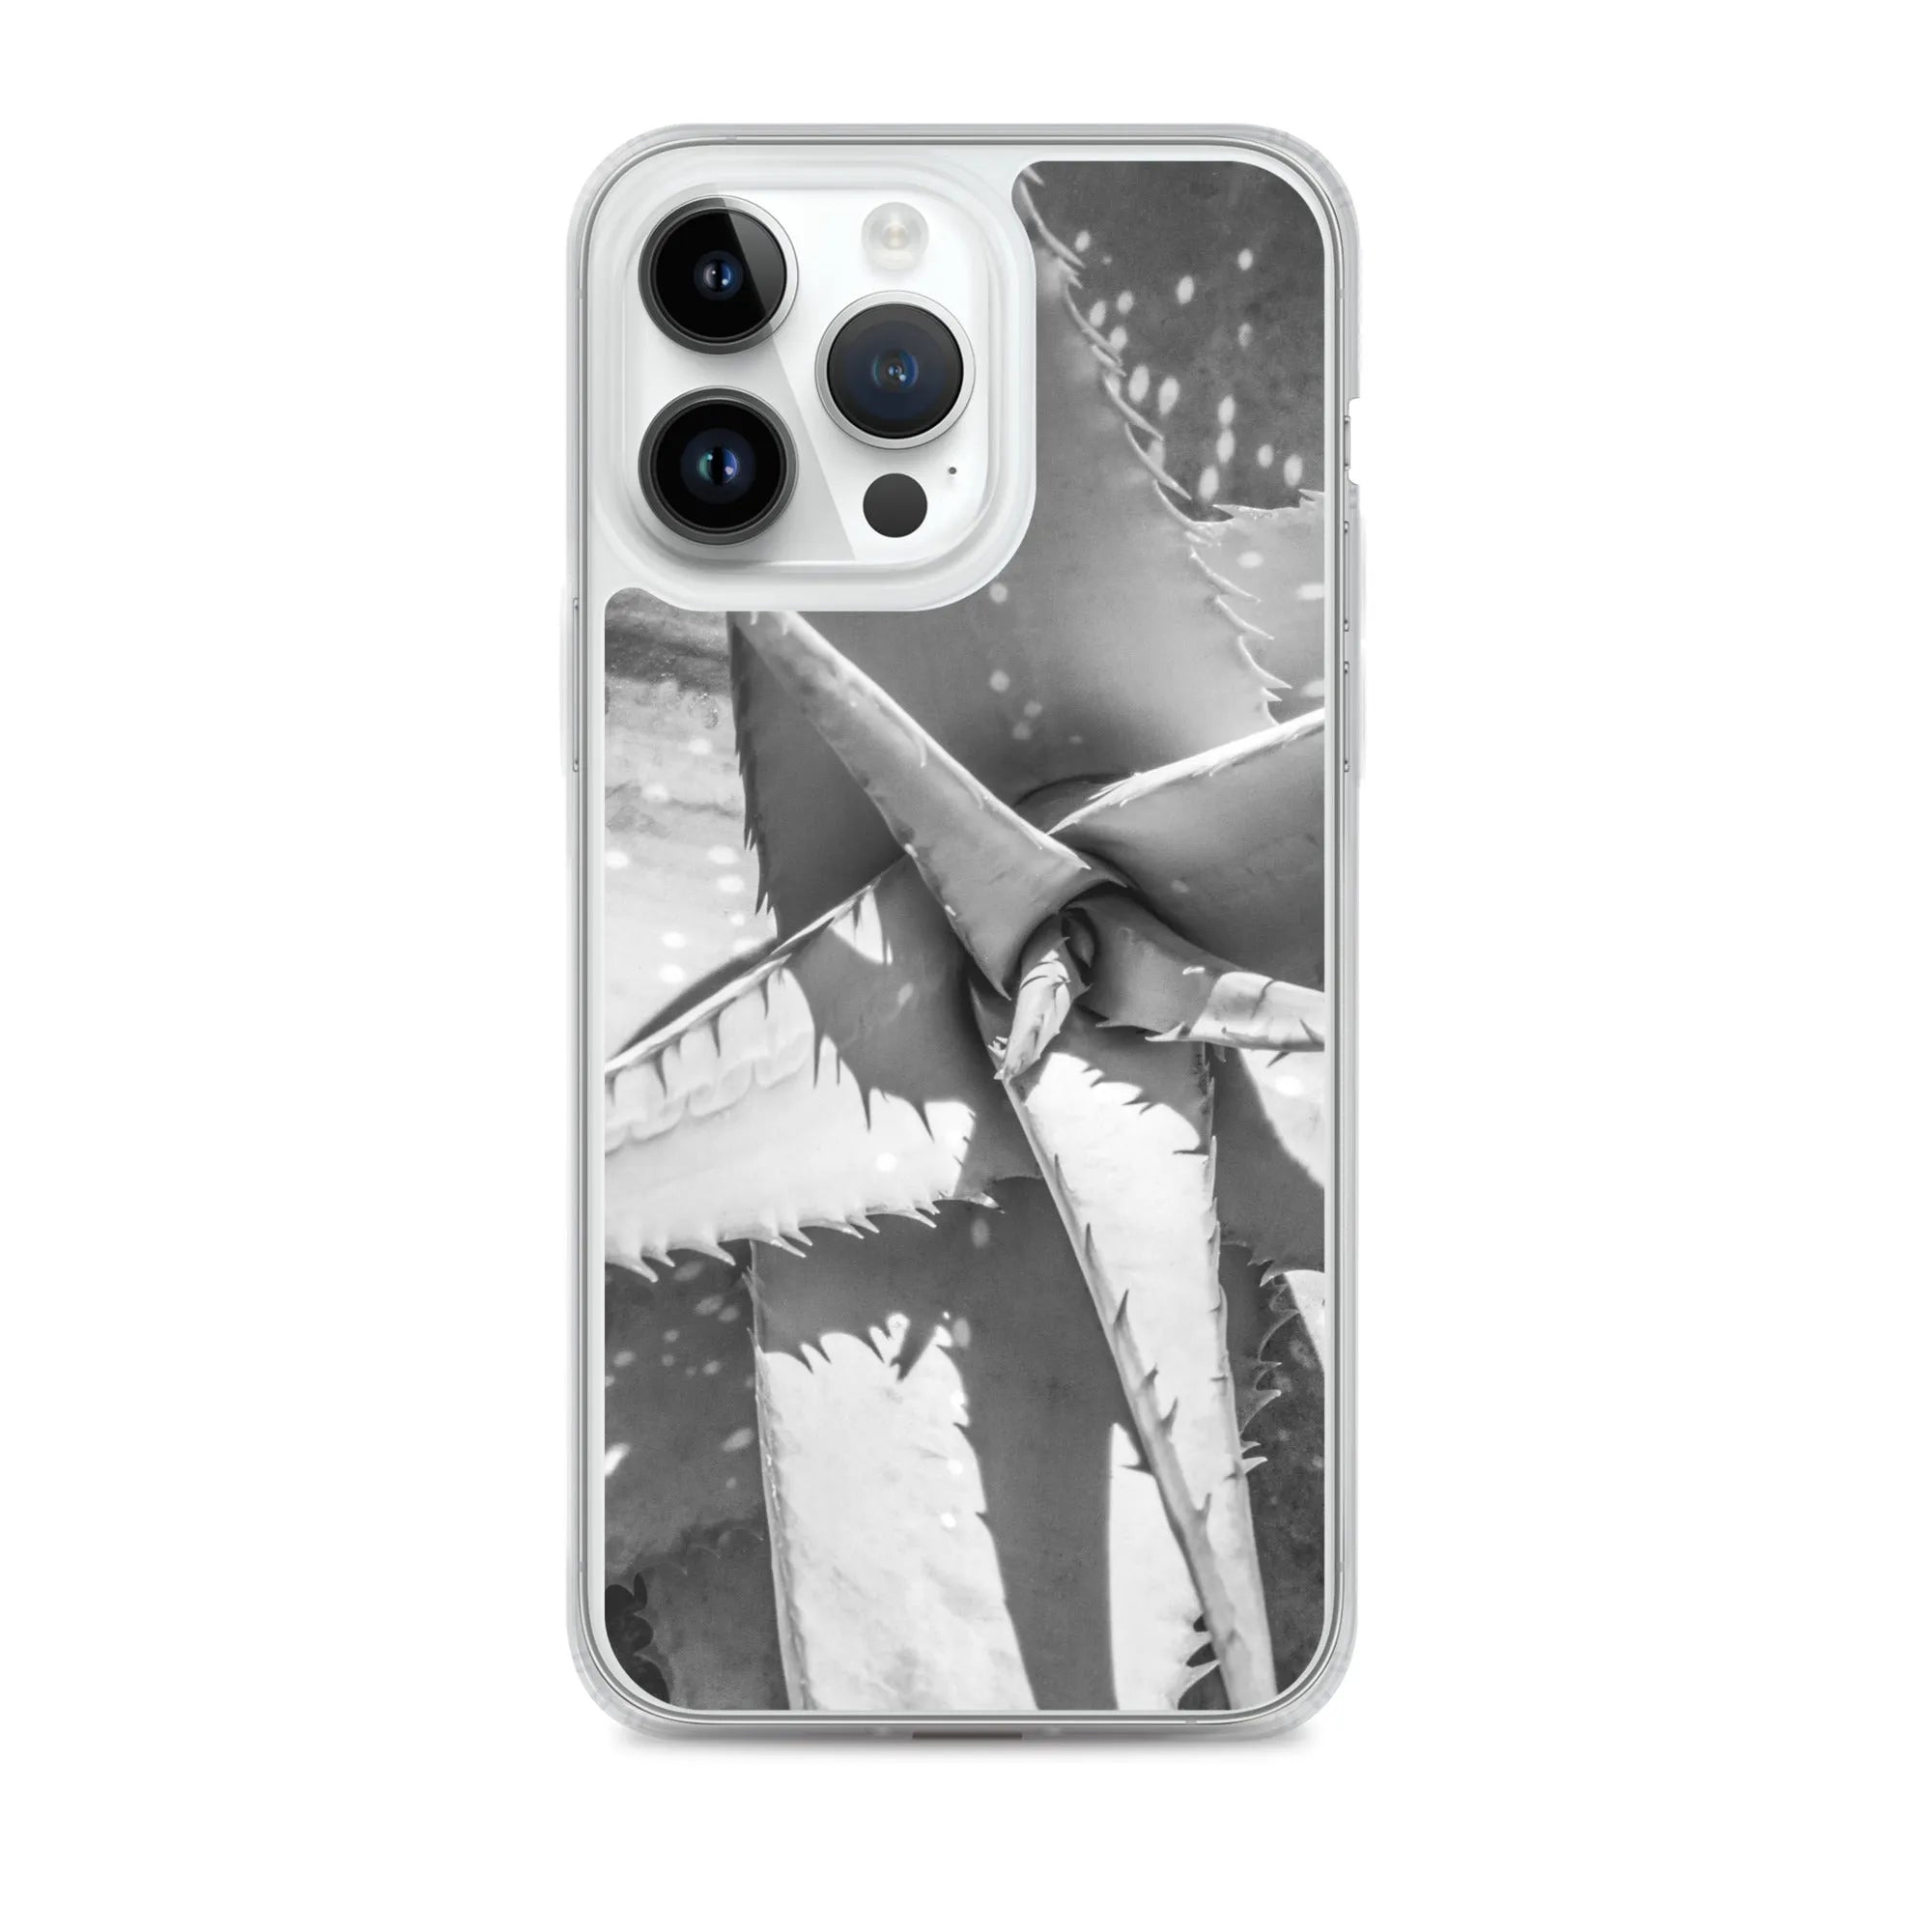 Starry-eyed Botanical Art Iphone Case - Black And White - Iphone 14 Pro Max - Mobile Phone Cases - Aesthetic Art